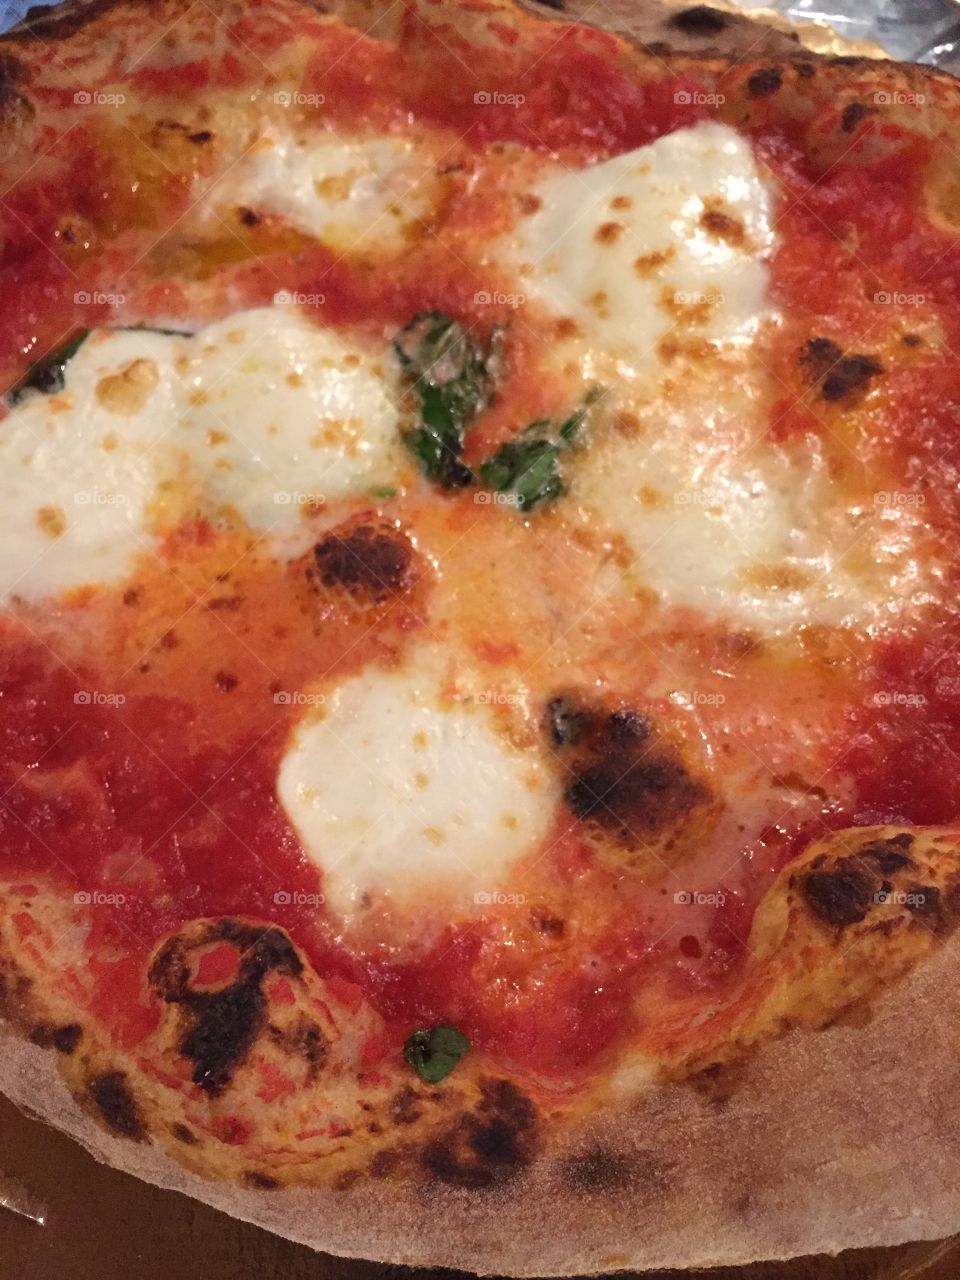 The most amazing margherita pizza that I had during my six weeks in Italy 